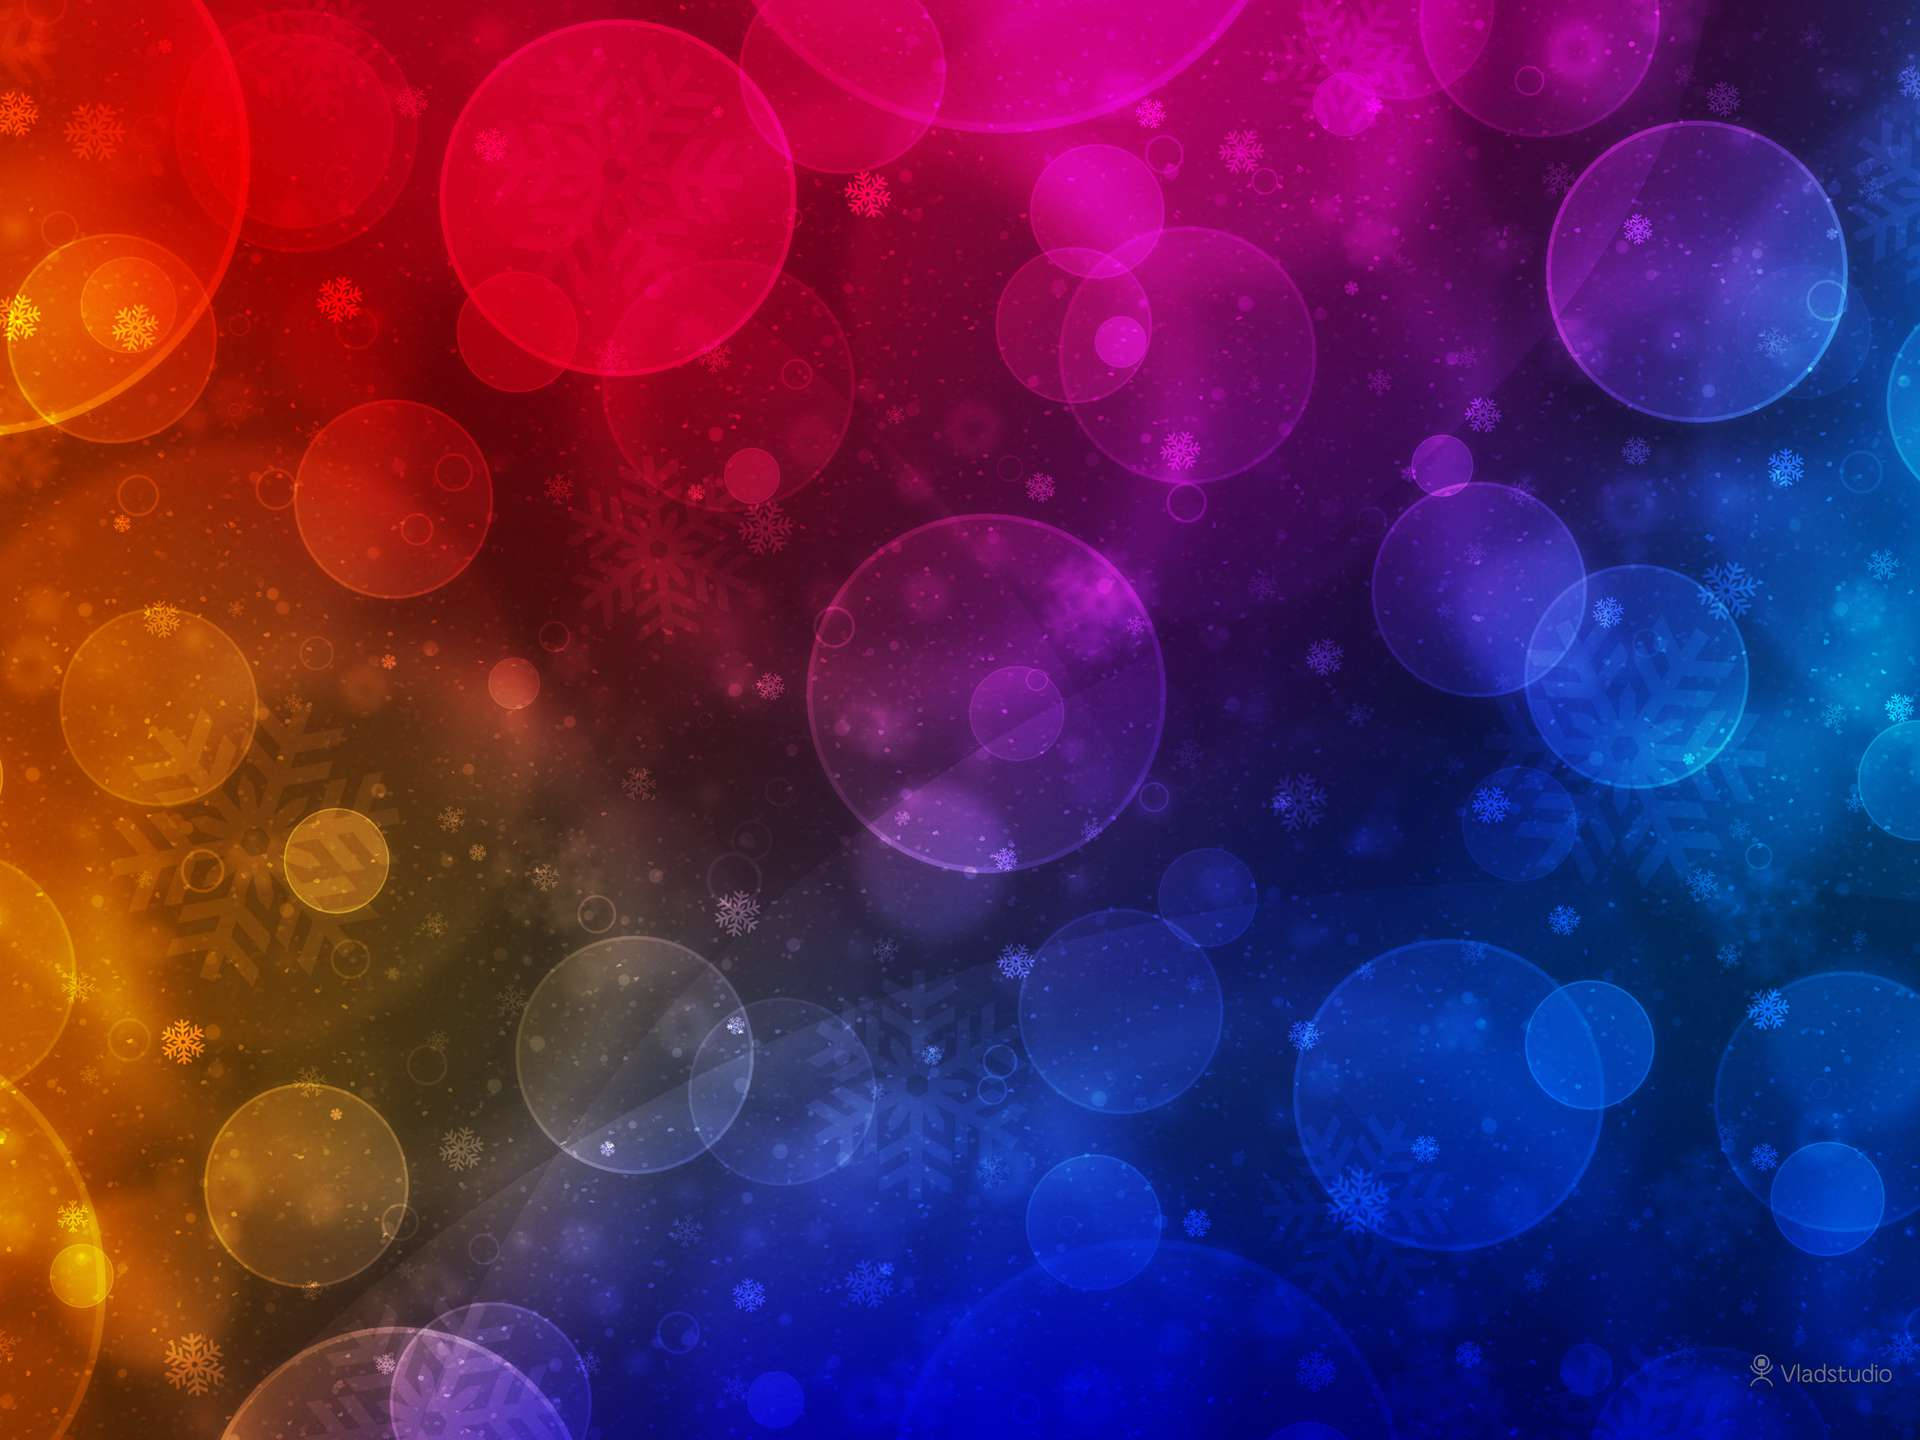 Multicolor Festive Lens Flare With Silhouette Snowflakes Wallpaper